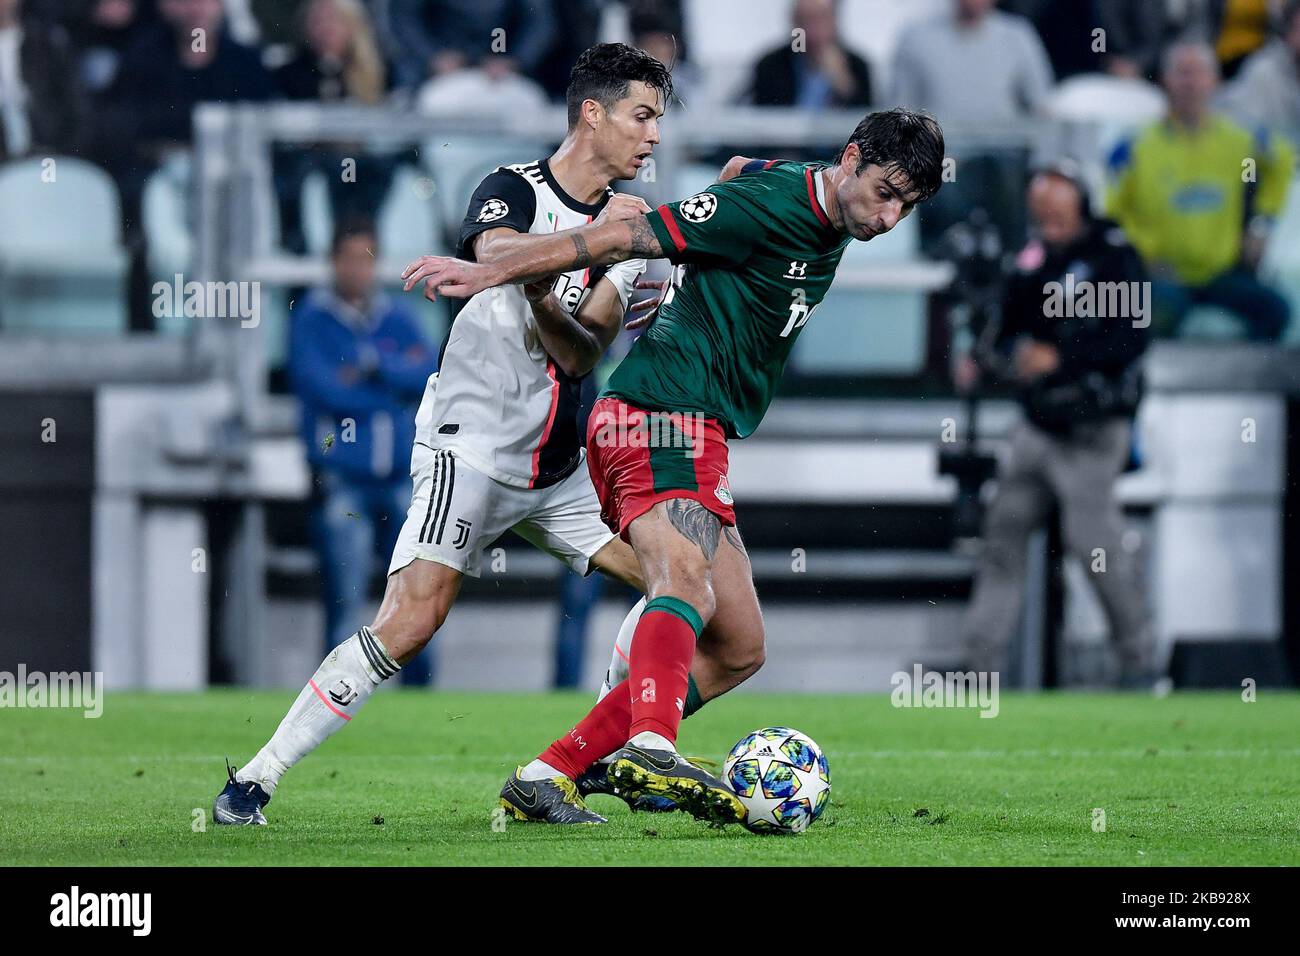 Cristiano Ronaldo of Juventus is challenged by Vedran Corluka of Lokomotiv Moscow during the UEFA Champions League group stage match between Juventus and Lokomotiv Moscow at the Juventus Stadium, Turin, Italy on 22 October 2019. (Photo by Giuseppe Maffia/NurPhoto) Stock Photo